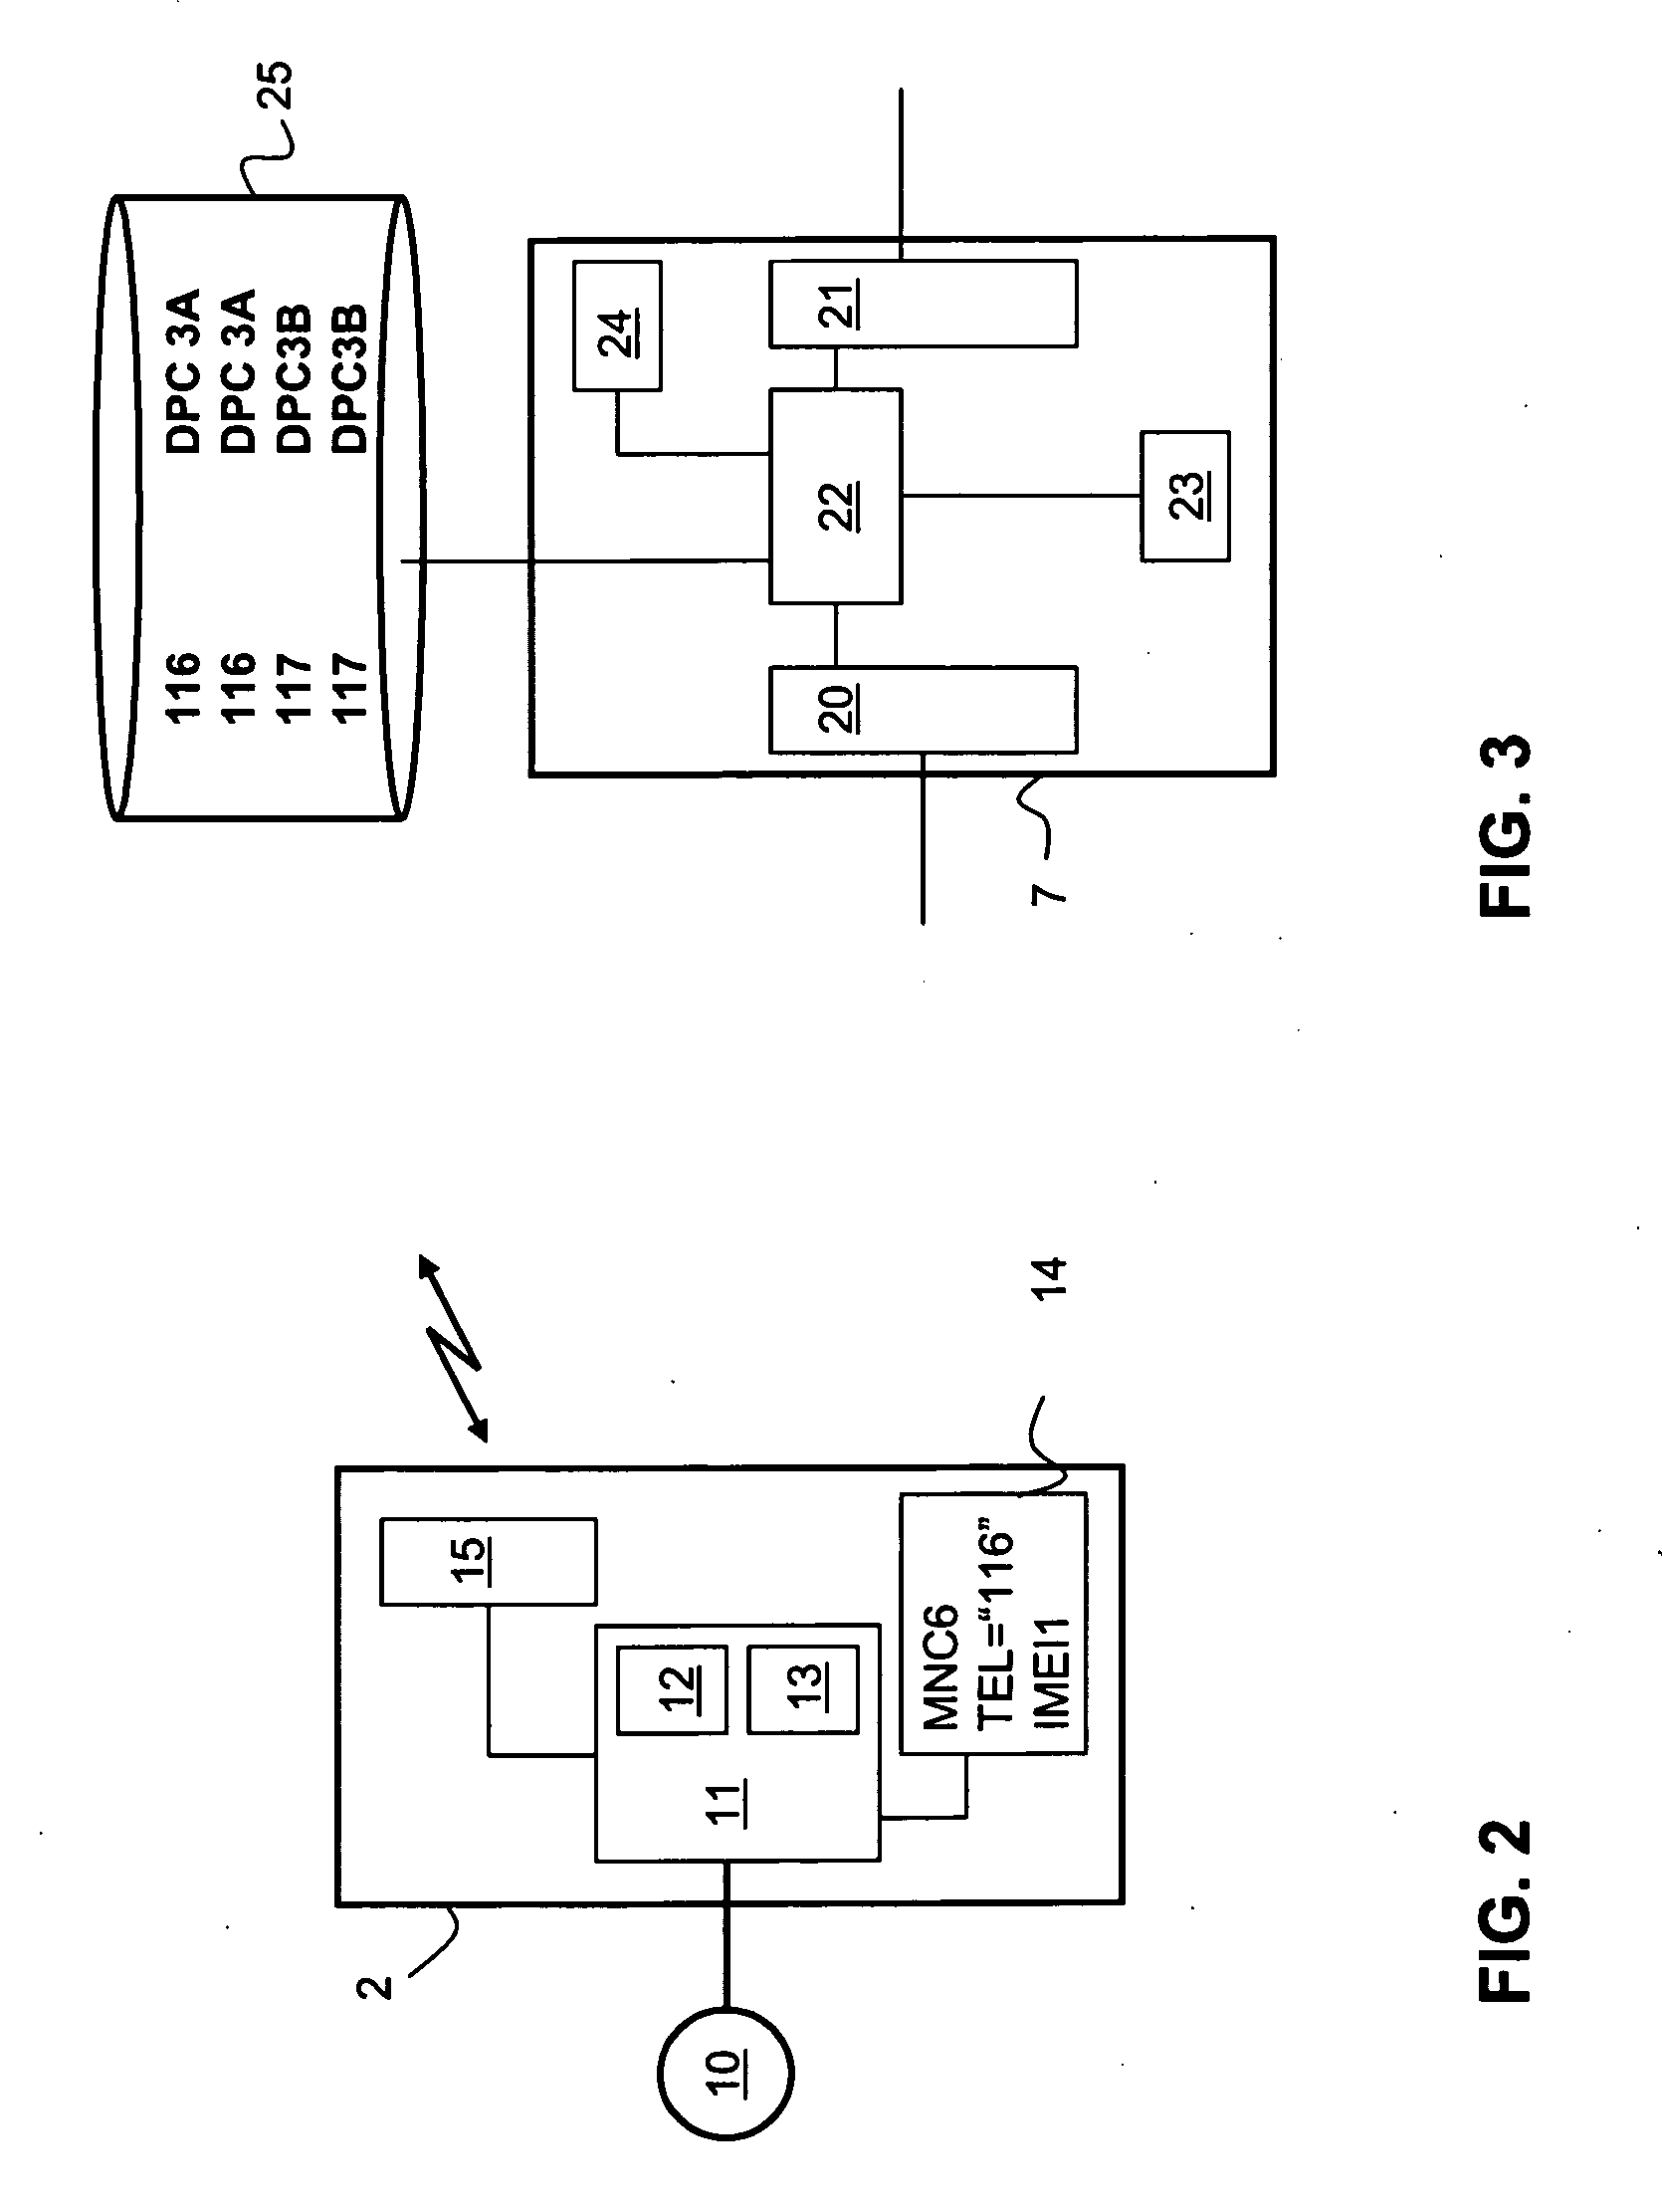 Method for Transferring Data from a Plurality of SIM-less Communication Modules